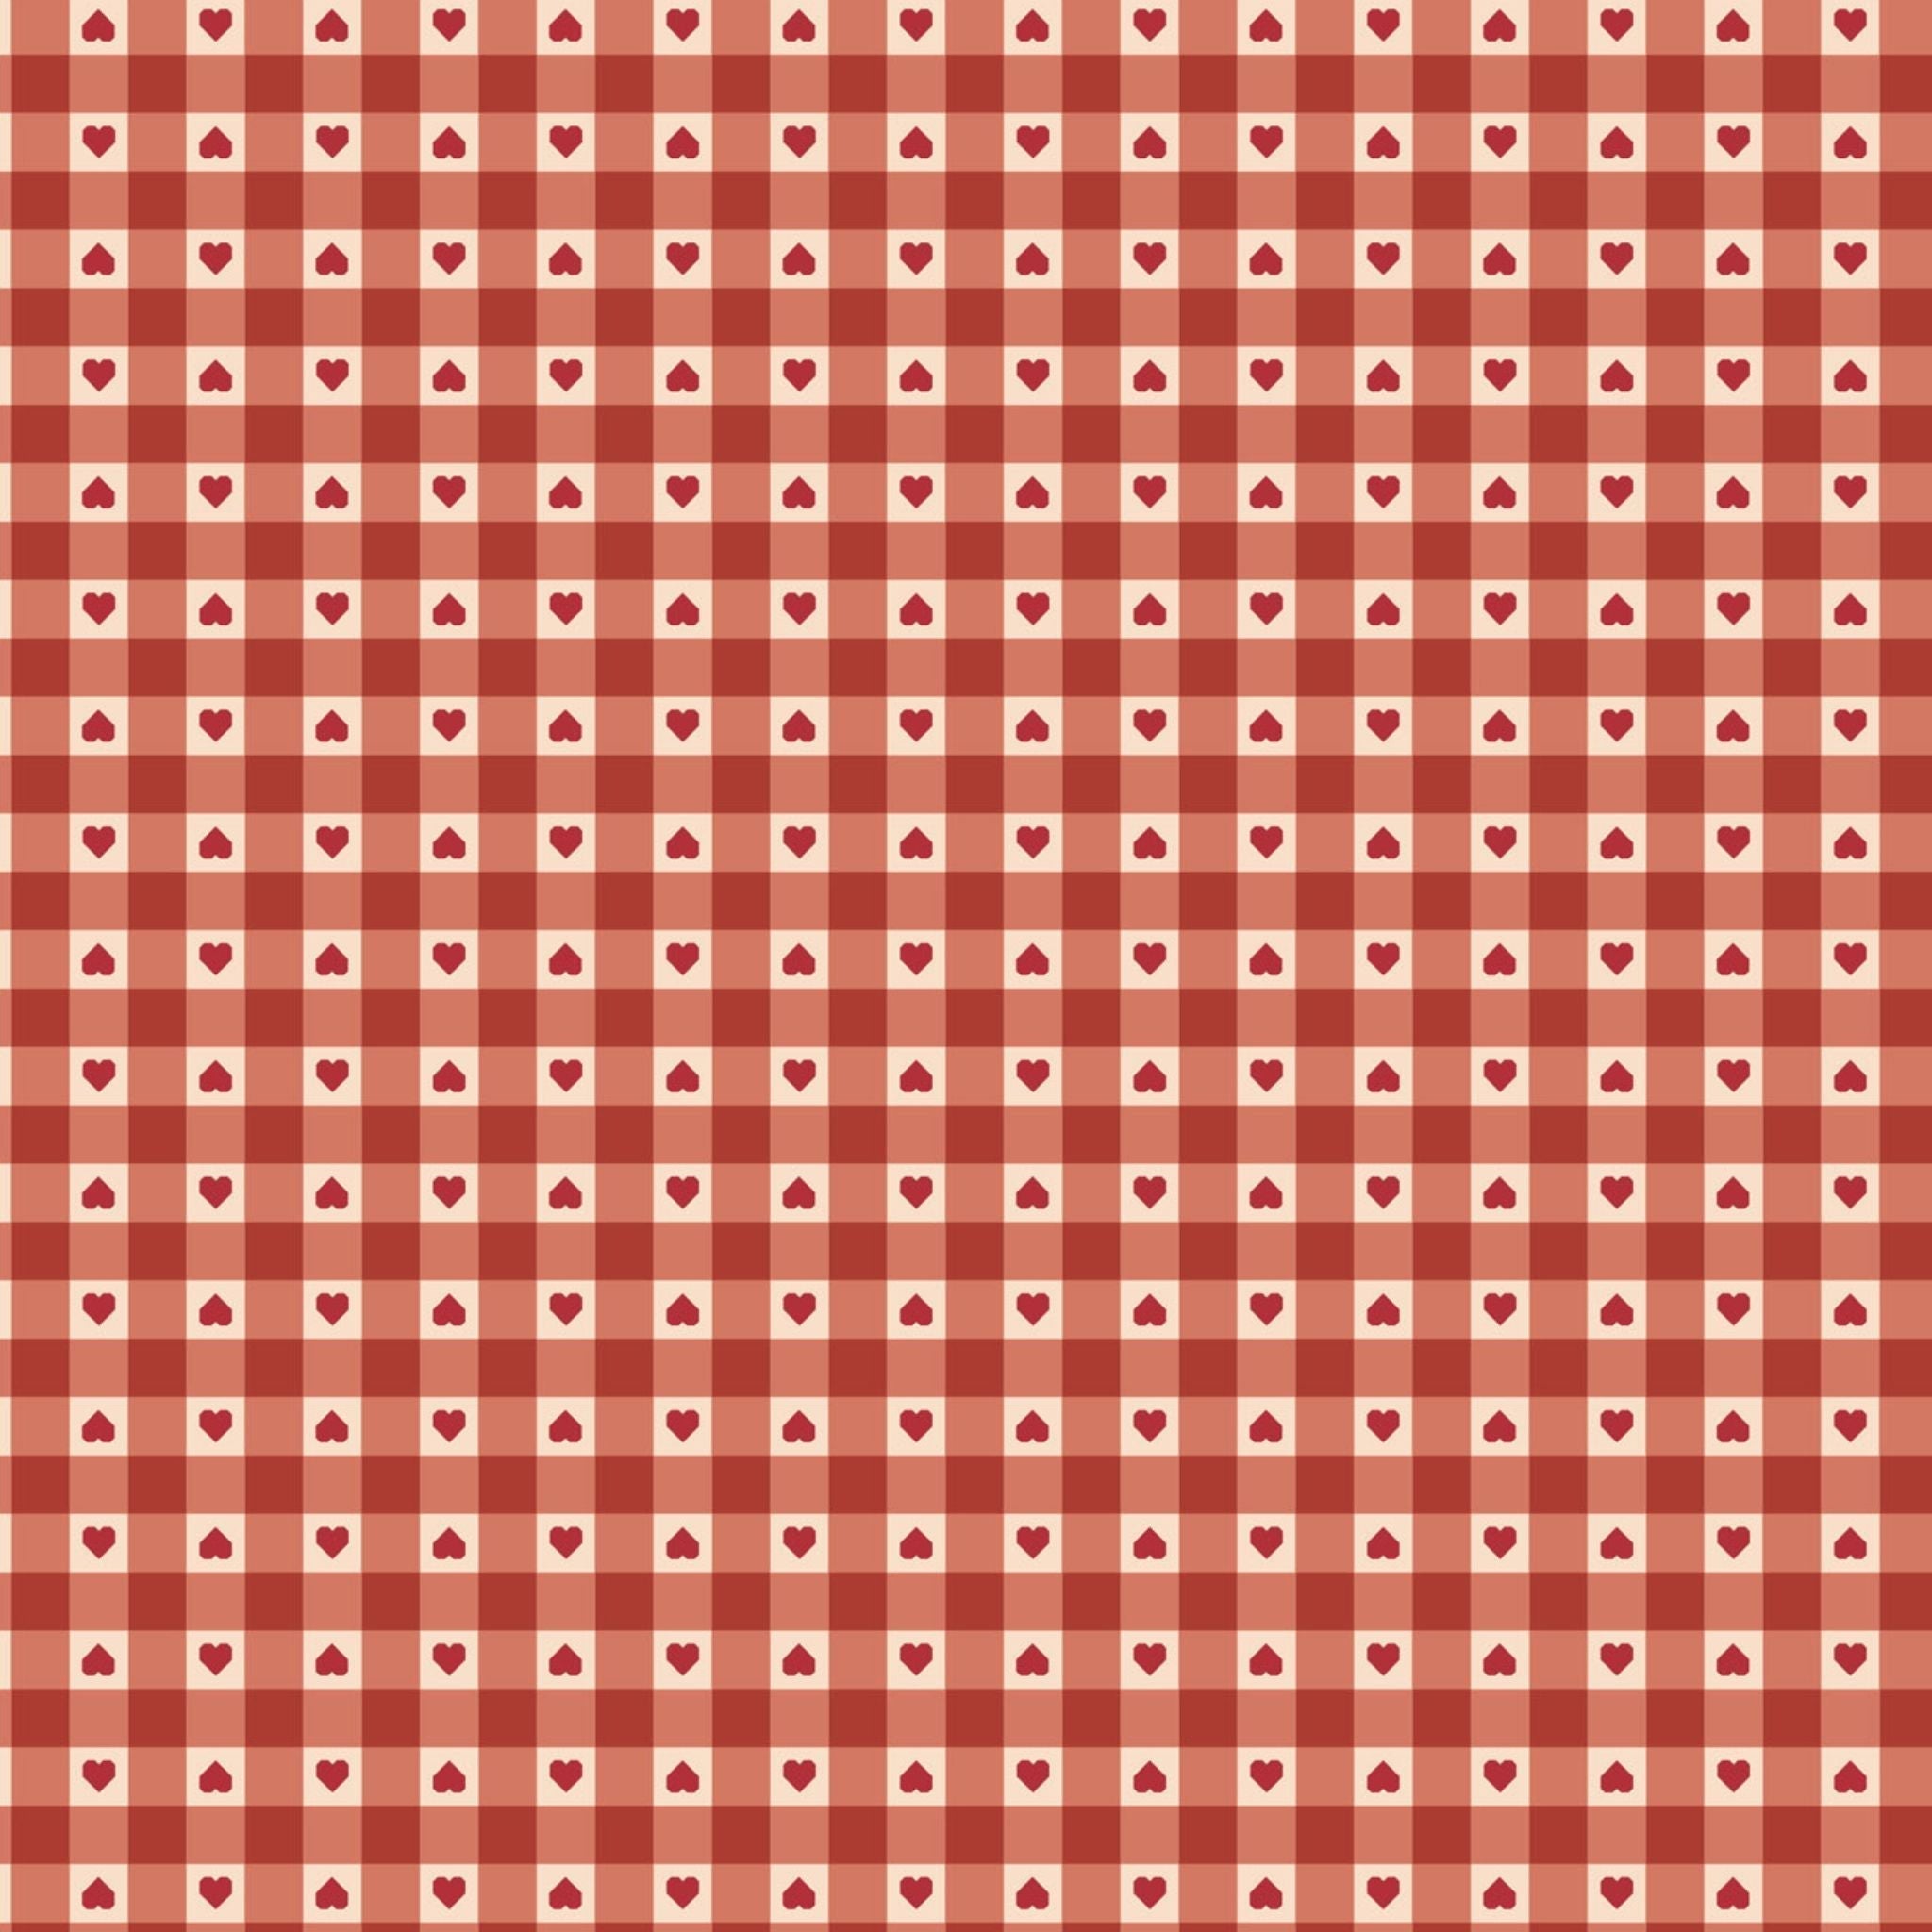 Tiny little red hearts on a red and cream gingham fabric - Grandmas Quilts by Lewis & Irene